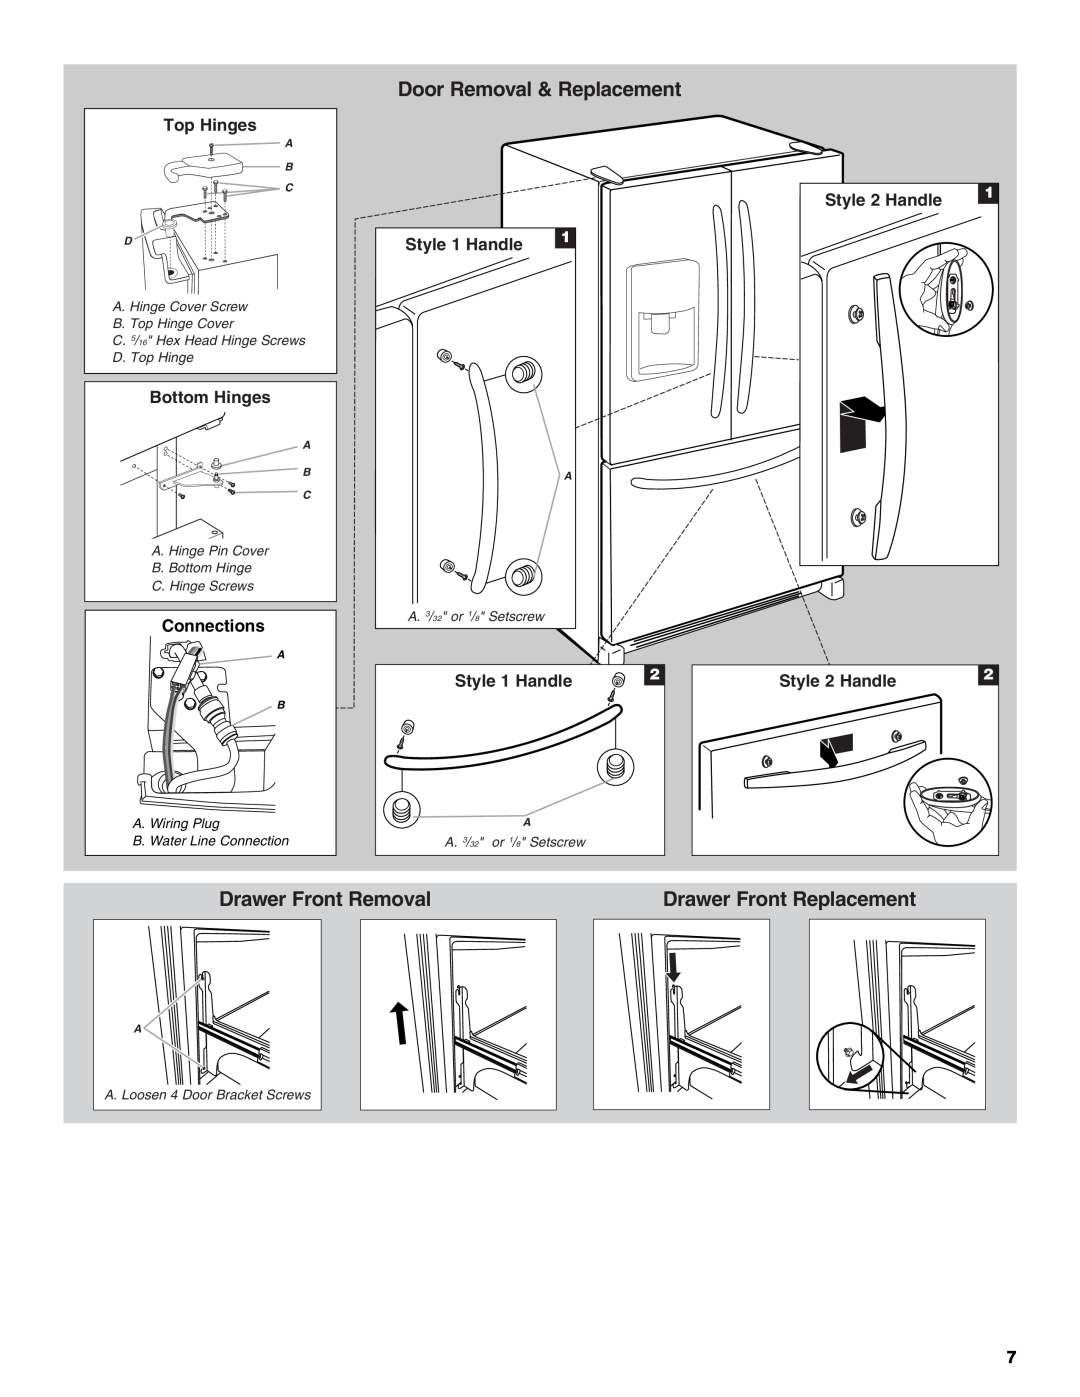 Maytag MFI2269VEM Door Removal & Replacement, Drawer Front Removal, Drawer Front Replacement, Top Hinges, Bottom Hinges 